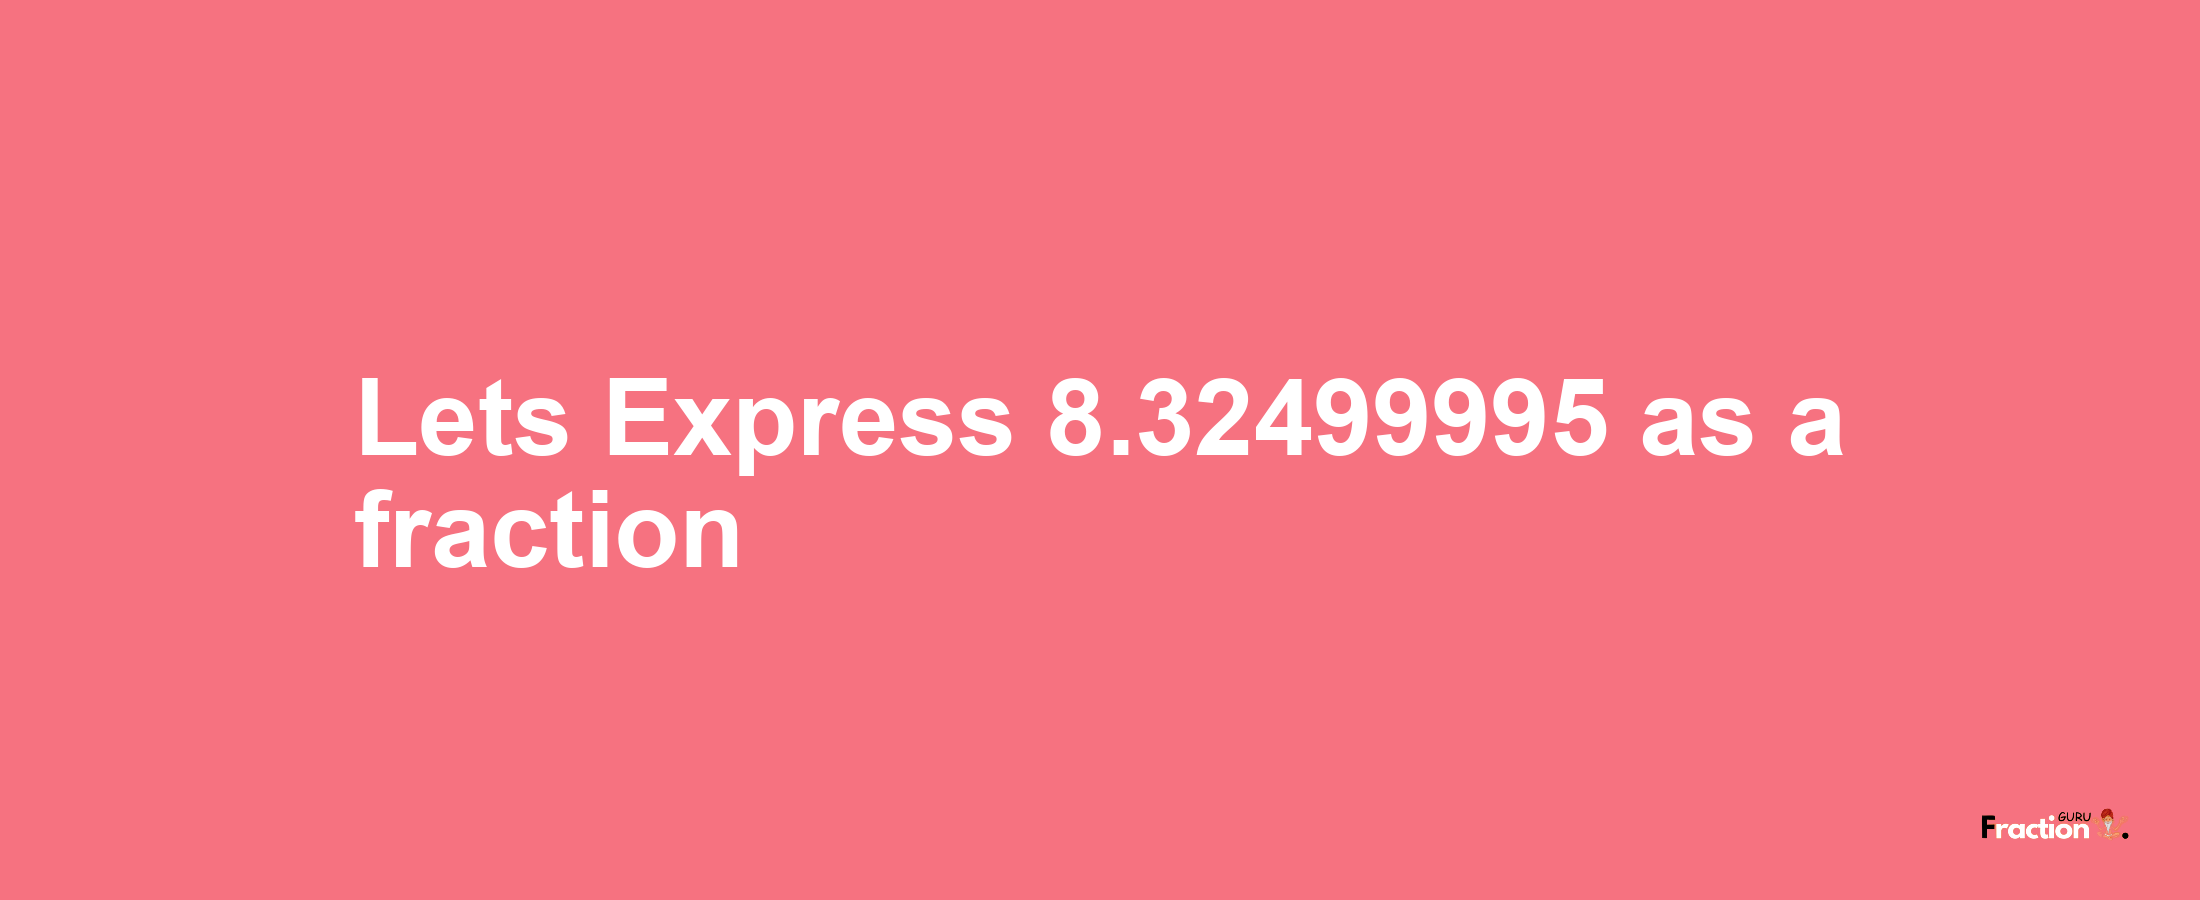 Lets Express 8.32499995 as afraction